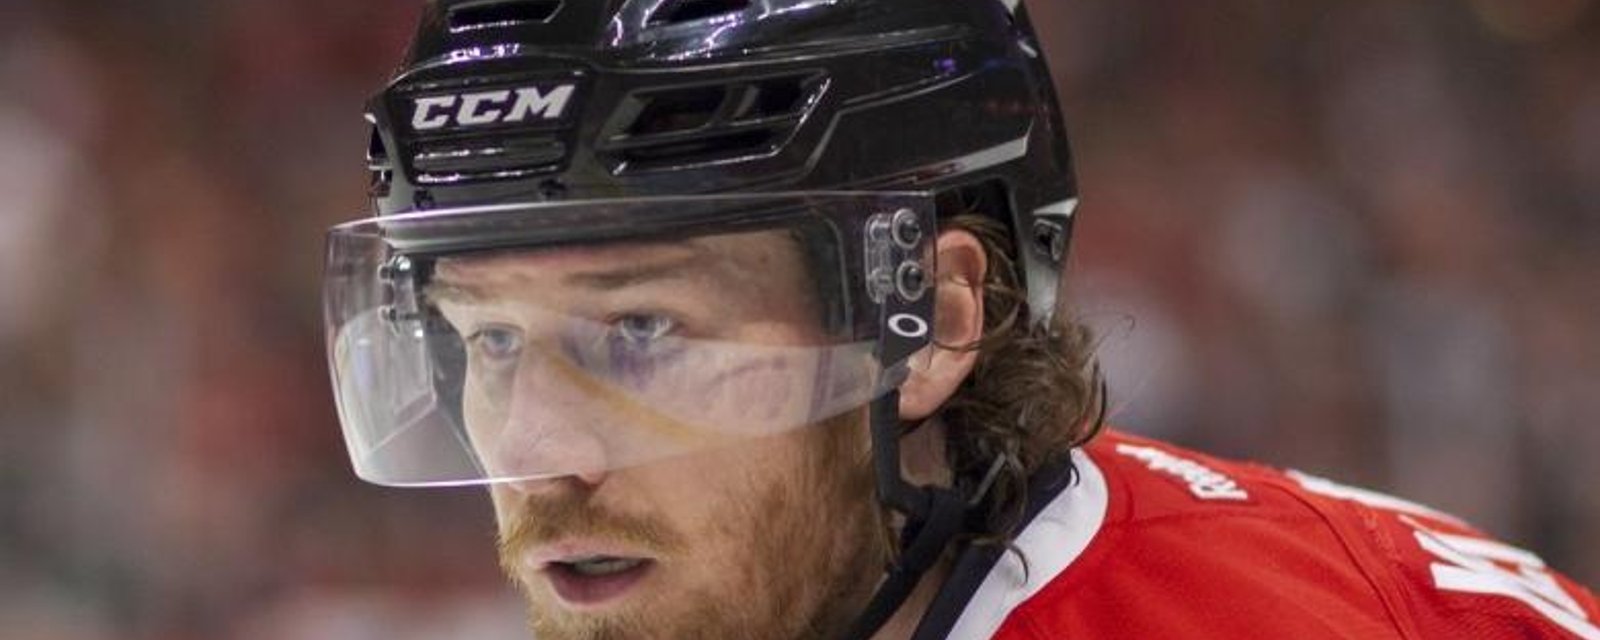 Blackhawks star Duncan Keith swings his stick at another player's face.